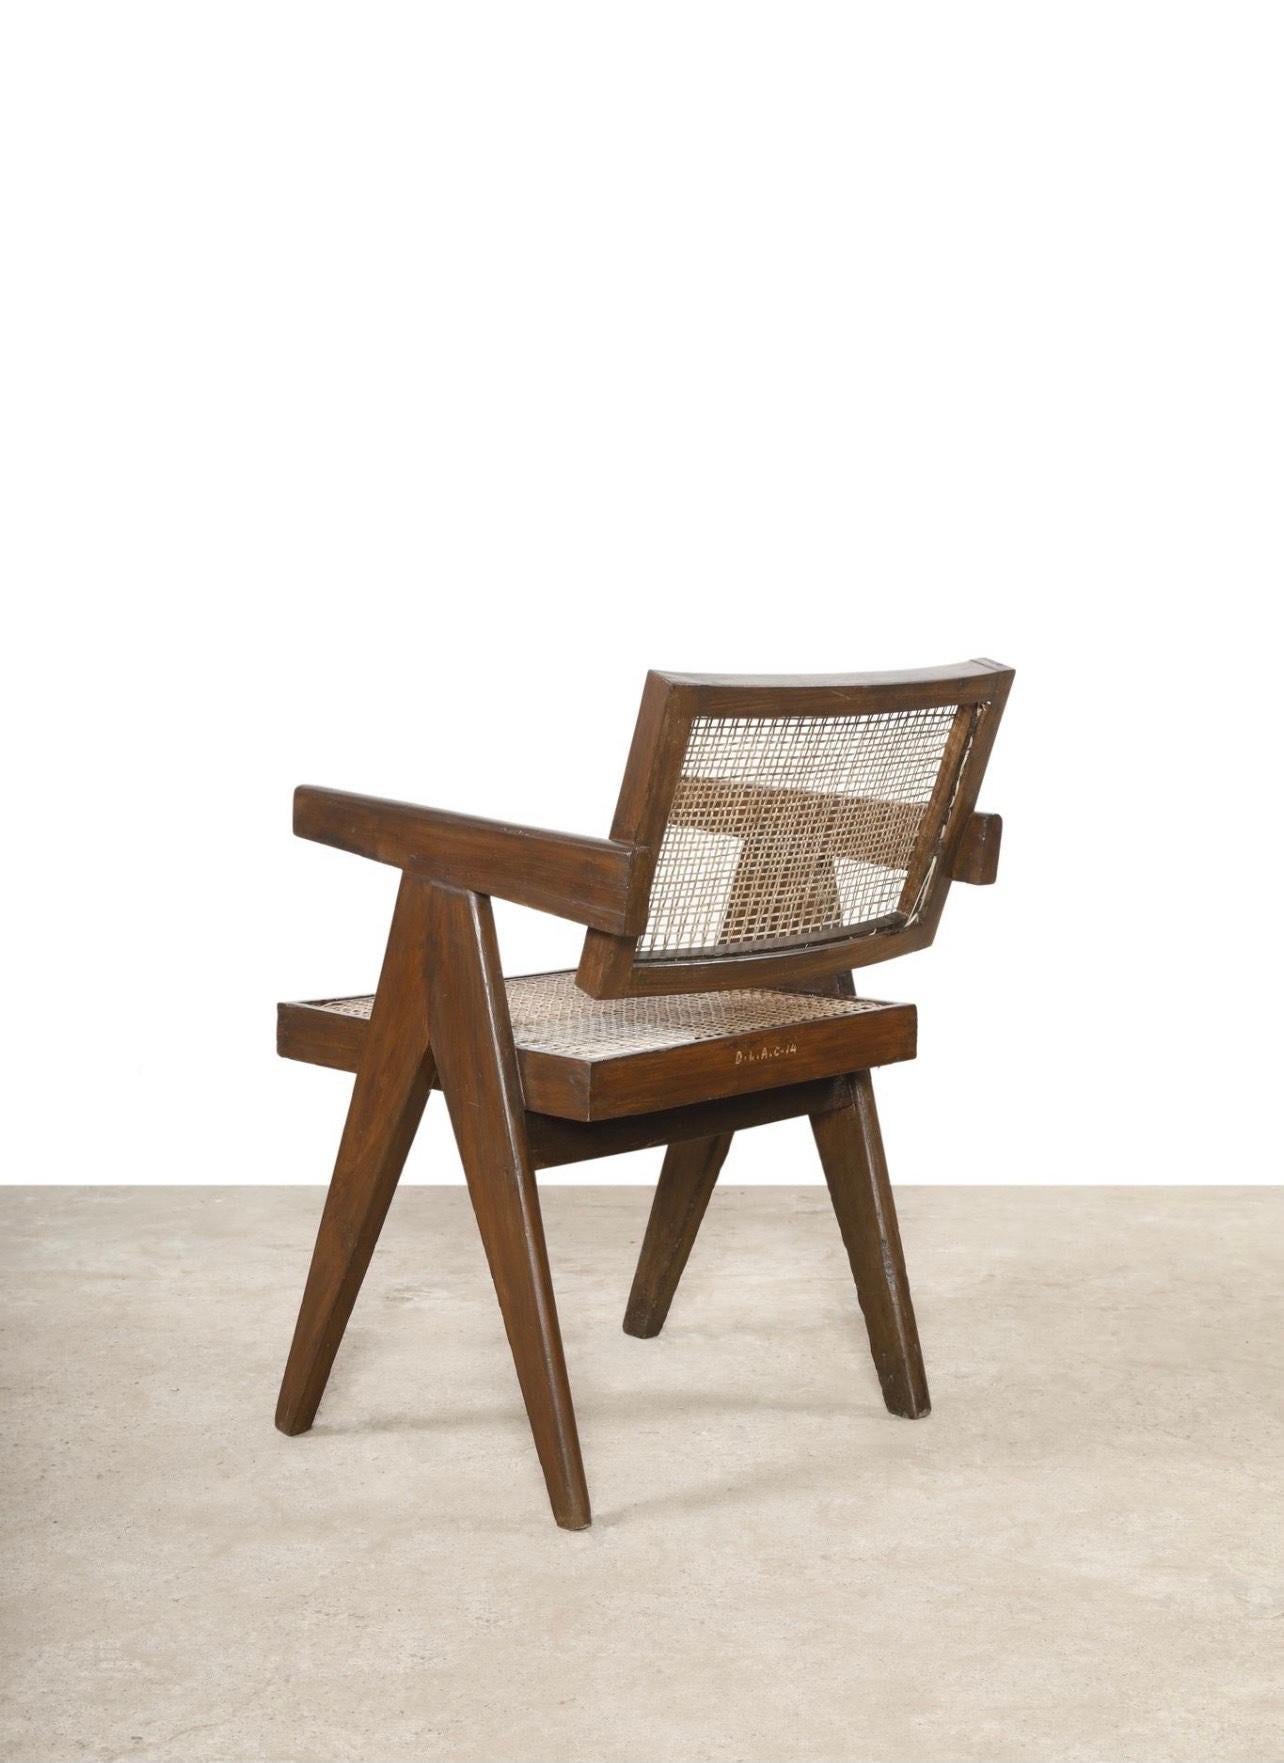 A single teak office chair by Pierre Jeanneret (1896-1967) from Chandigarh, India.
Cane seat and back, circa 1952.
Signs of use and wear attribute is originality.

Documented E. Touchaleaume G. Moreau Le Corbusier, Pierre Jeanneret, L'Aventure